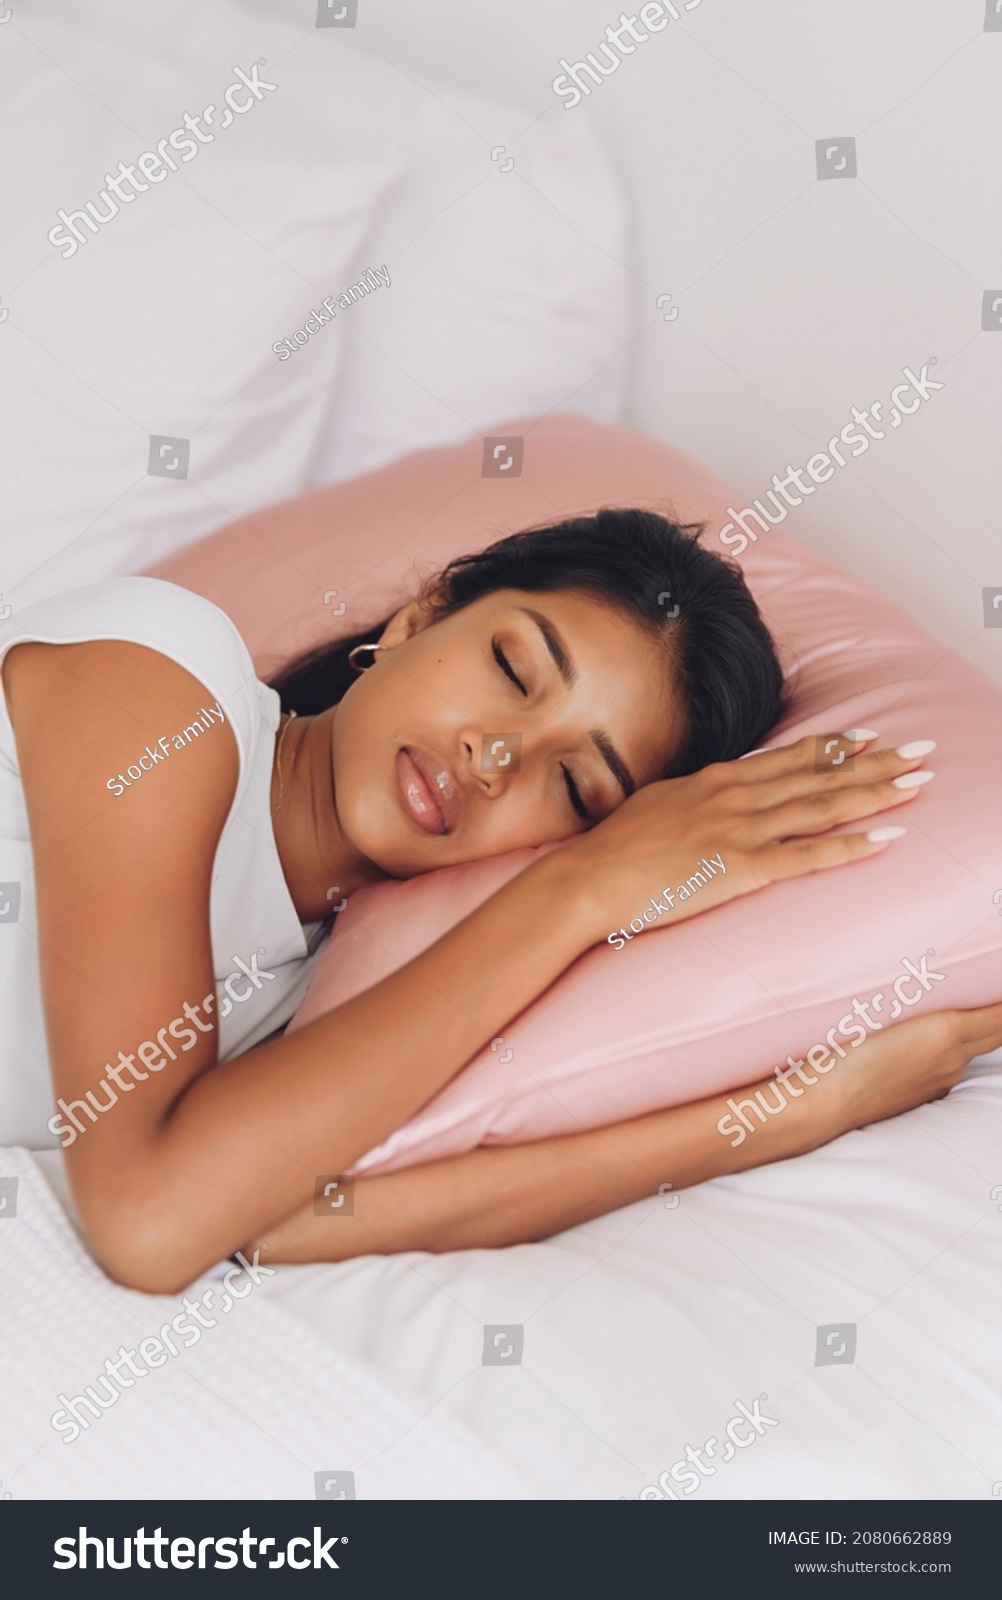 Beautiful Indonesian girl lying on a pink pillow with a silk pillowcase.
 #2080662889